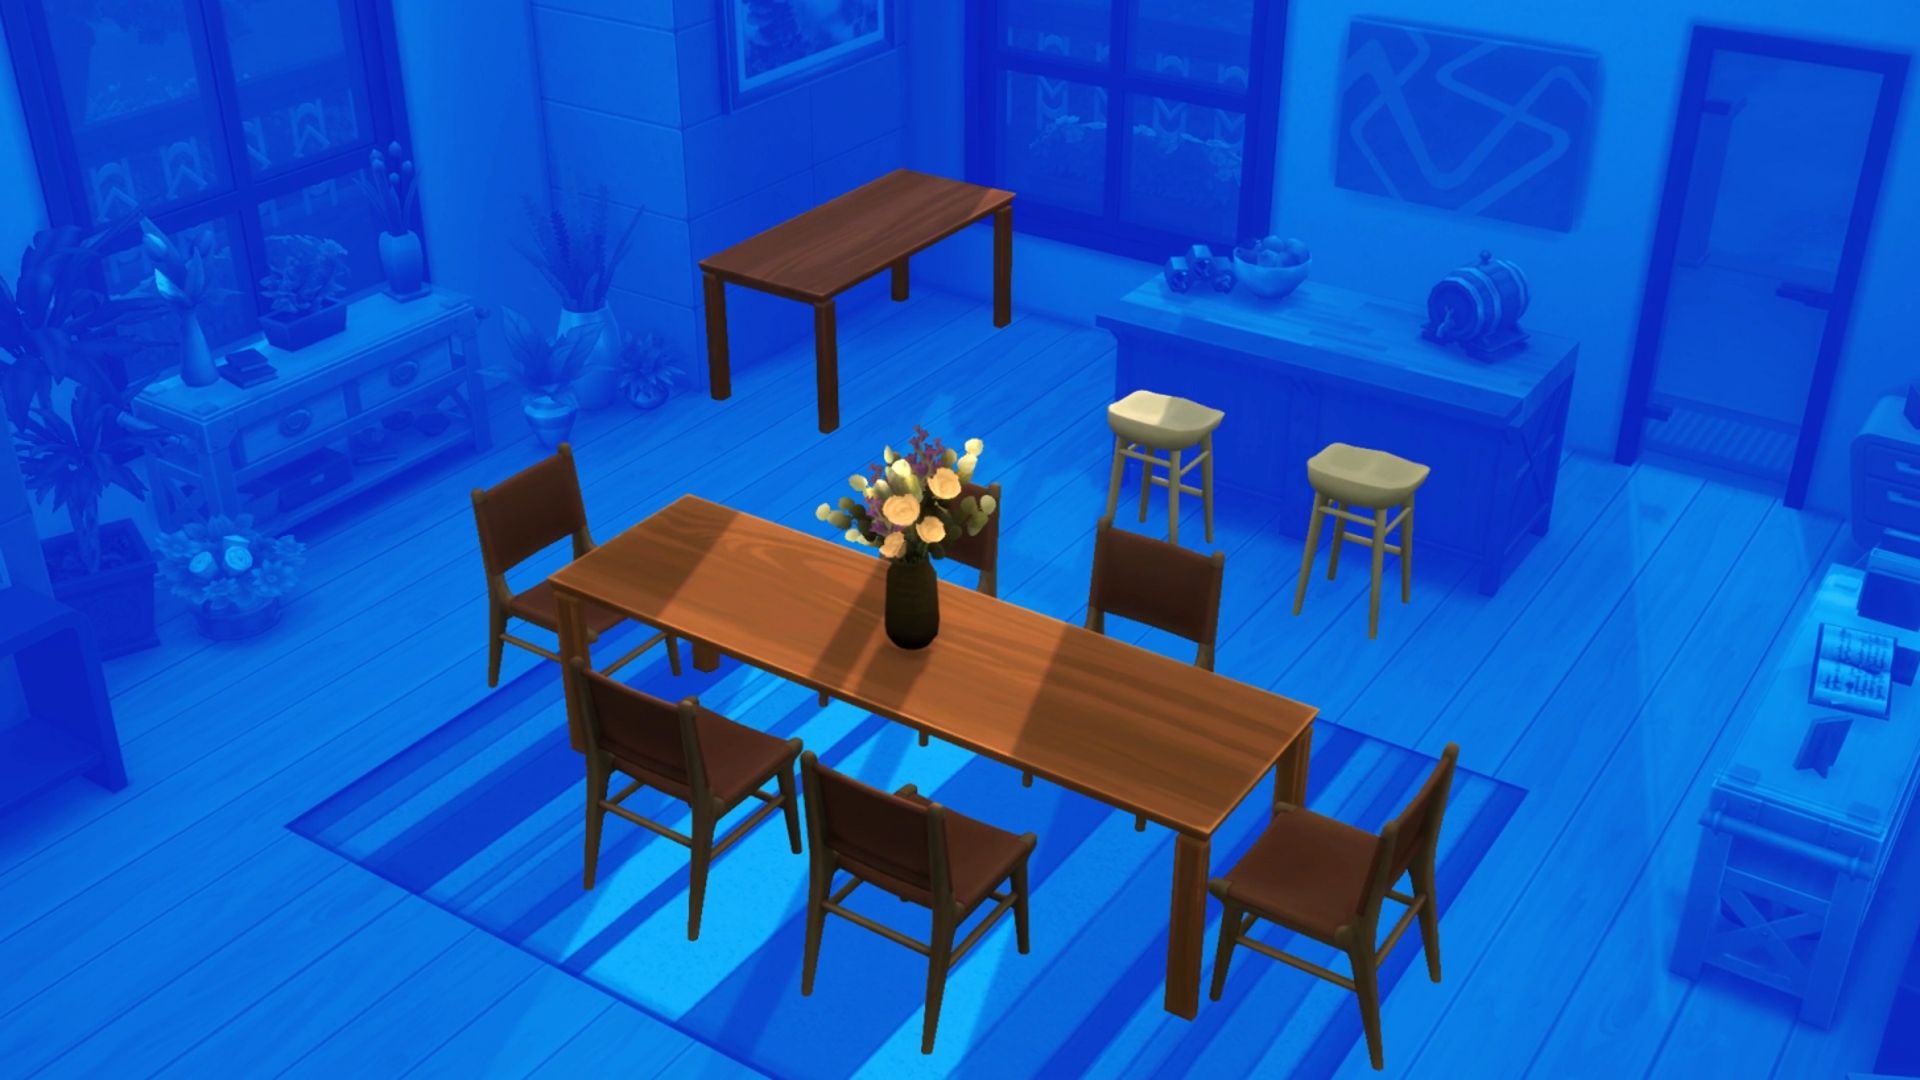 The Sims 4 Sims Wooden Table And Chairs In Build Mode